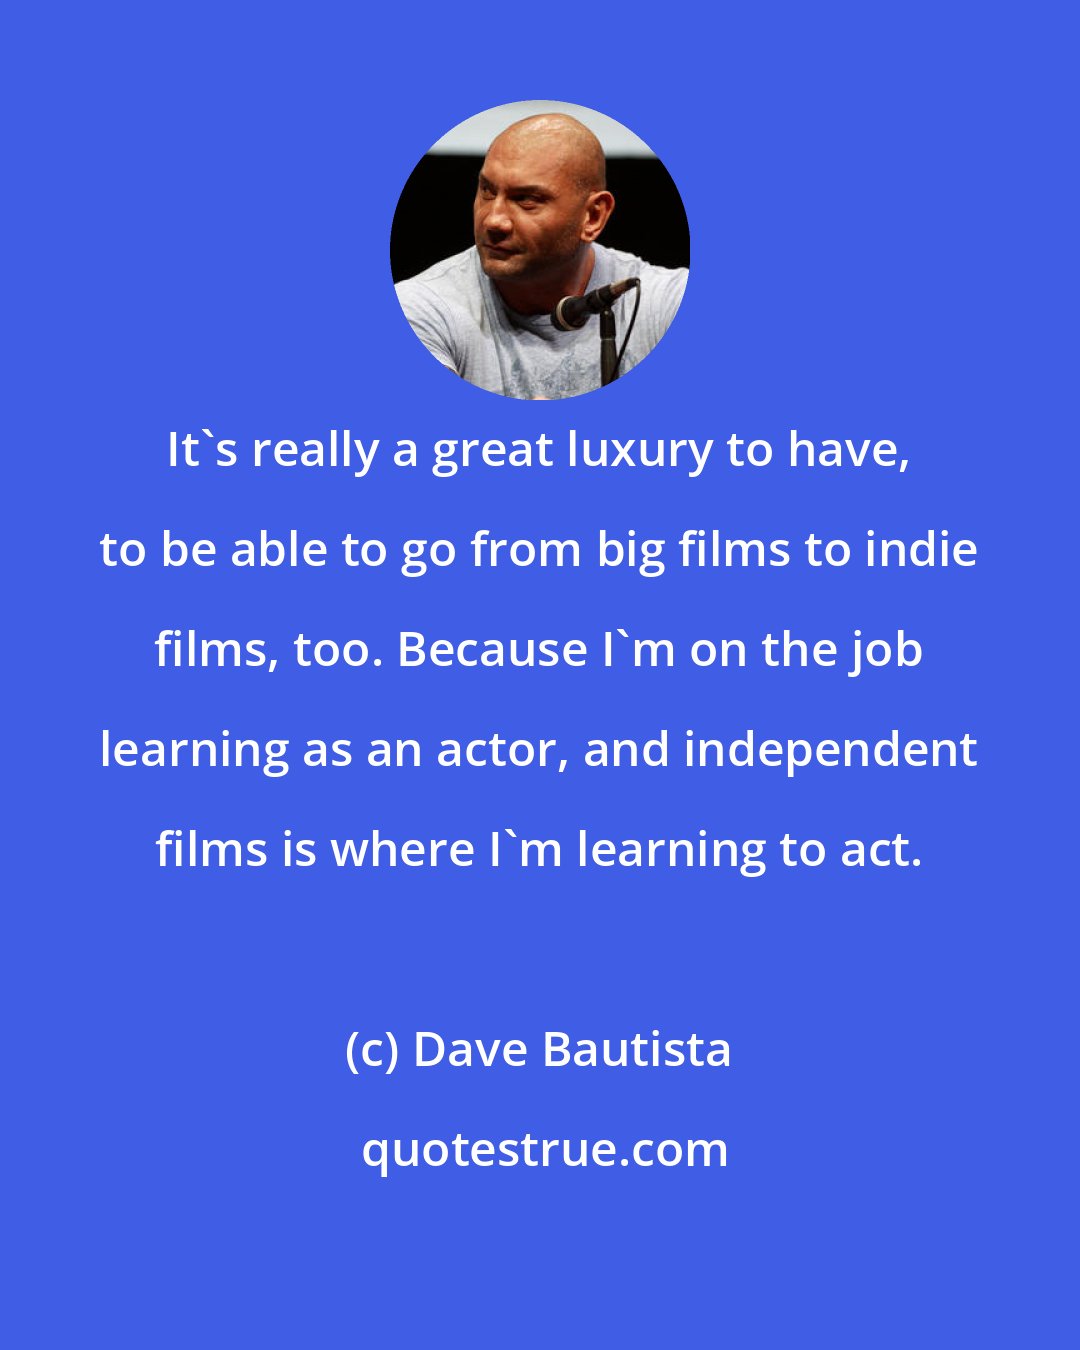 Dave Bautista: It's really a great luxury to have, to be able to go from big films to indie films, too. Because I'm on the job learning as an actor, and independent films is where I'm learning to act.